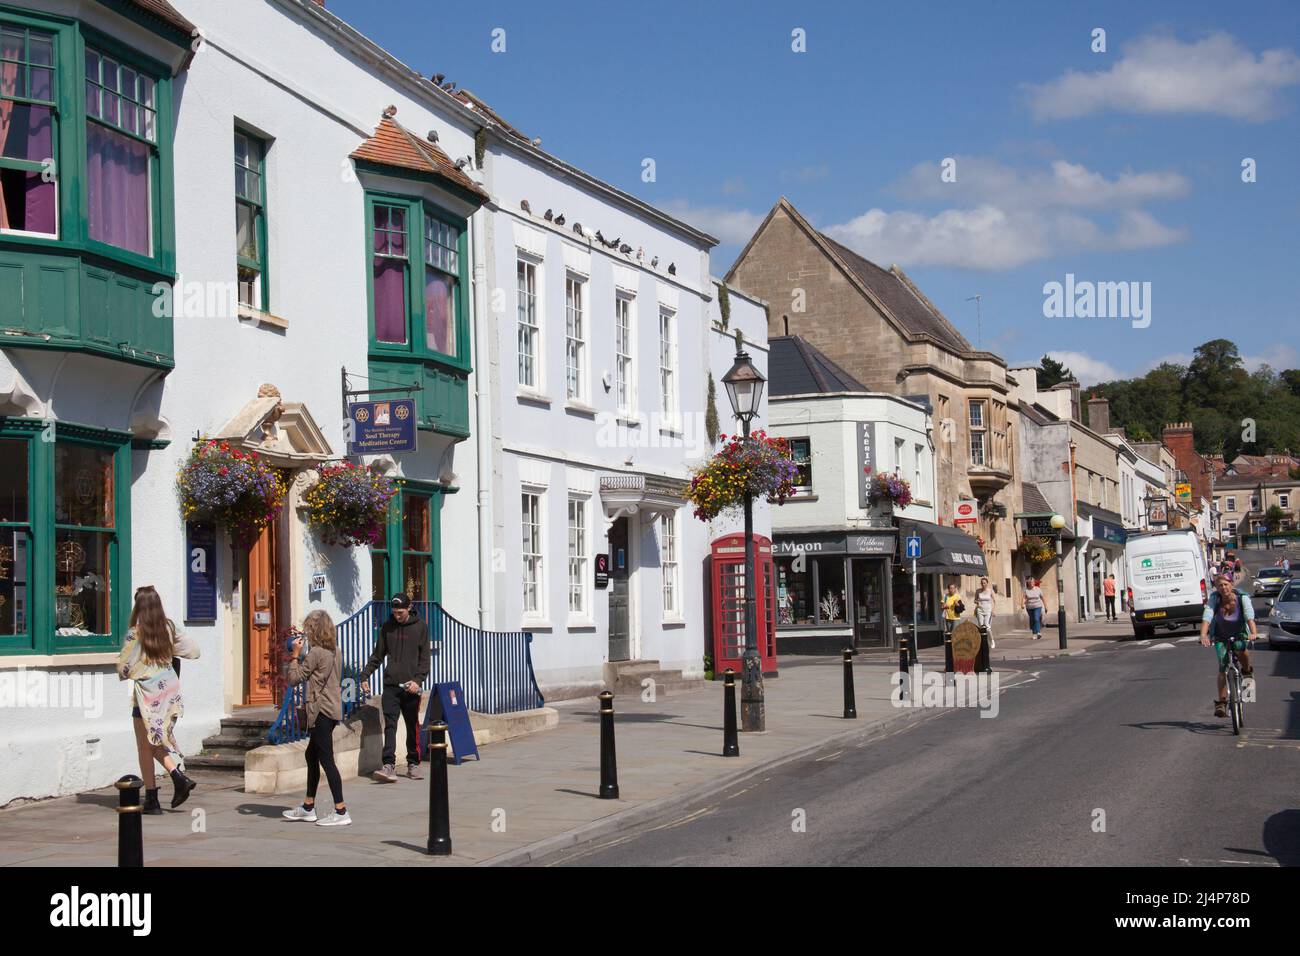 Views of the High Street in Glastonbury, Somerset in the UK Stock Photo